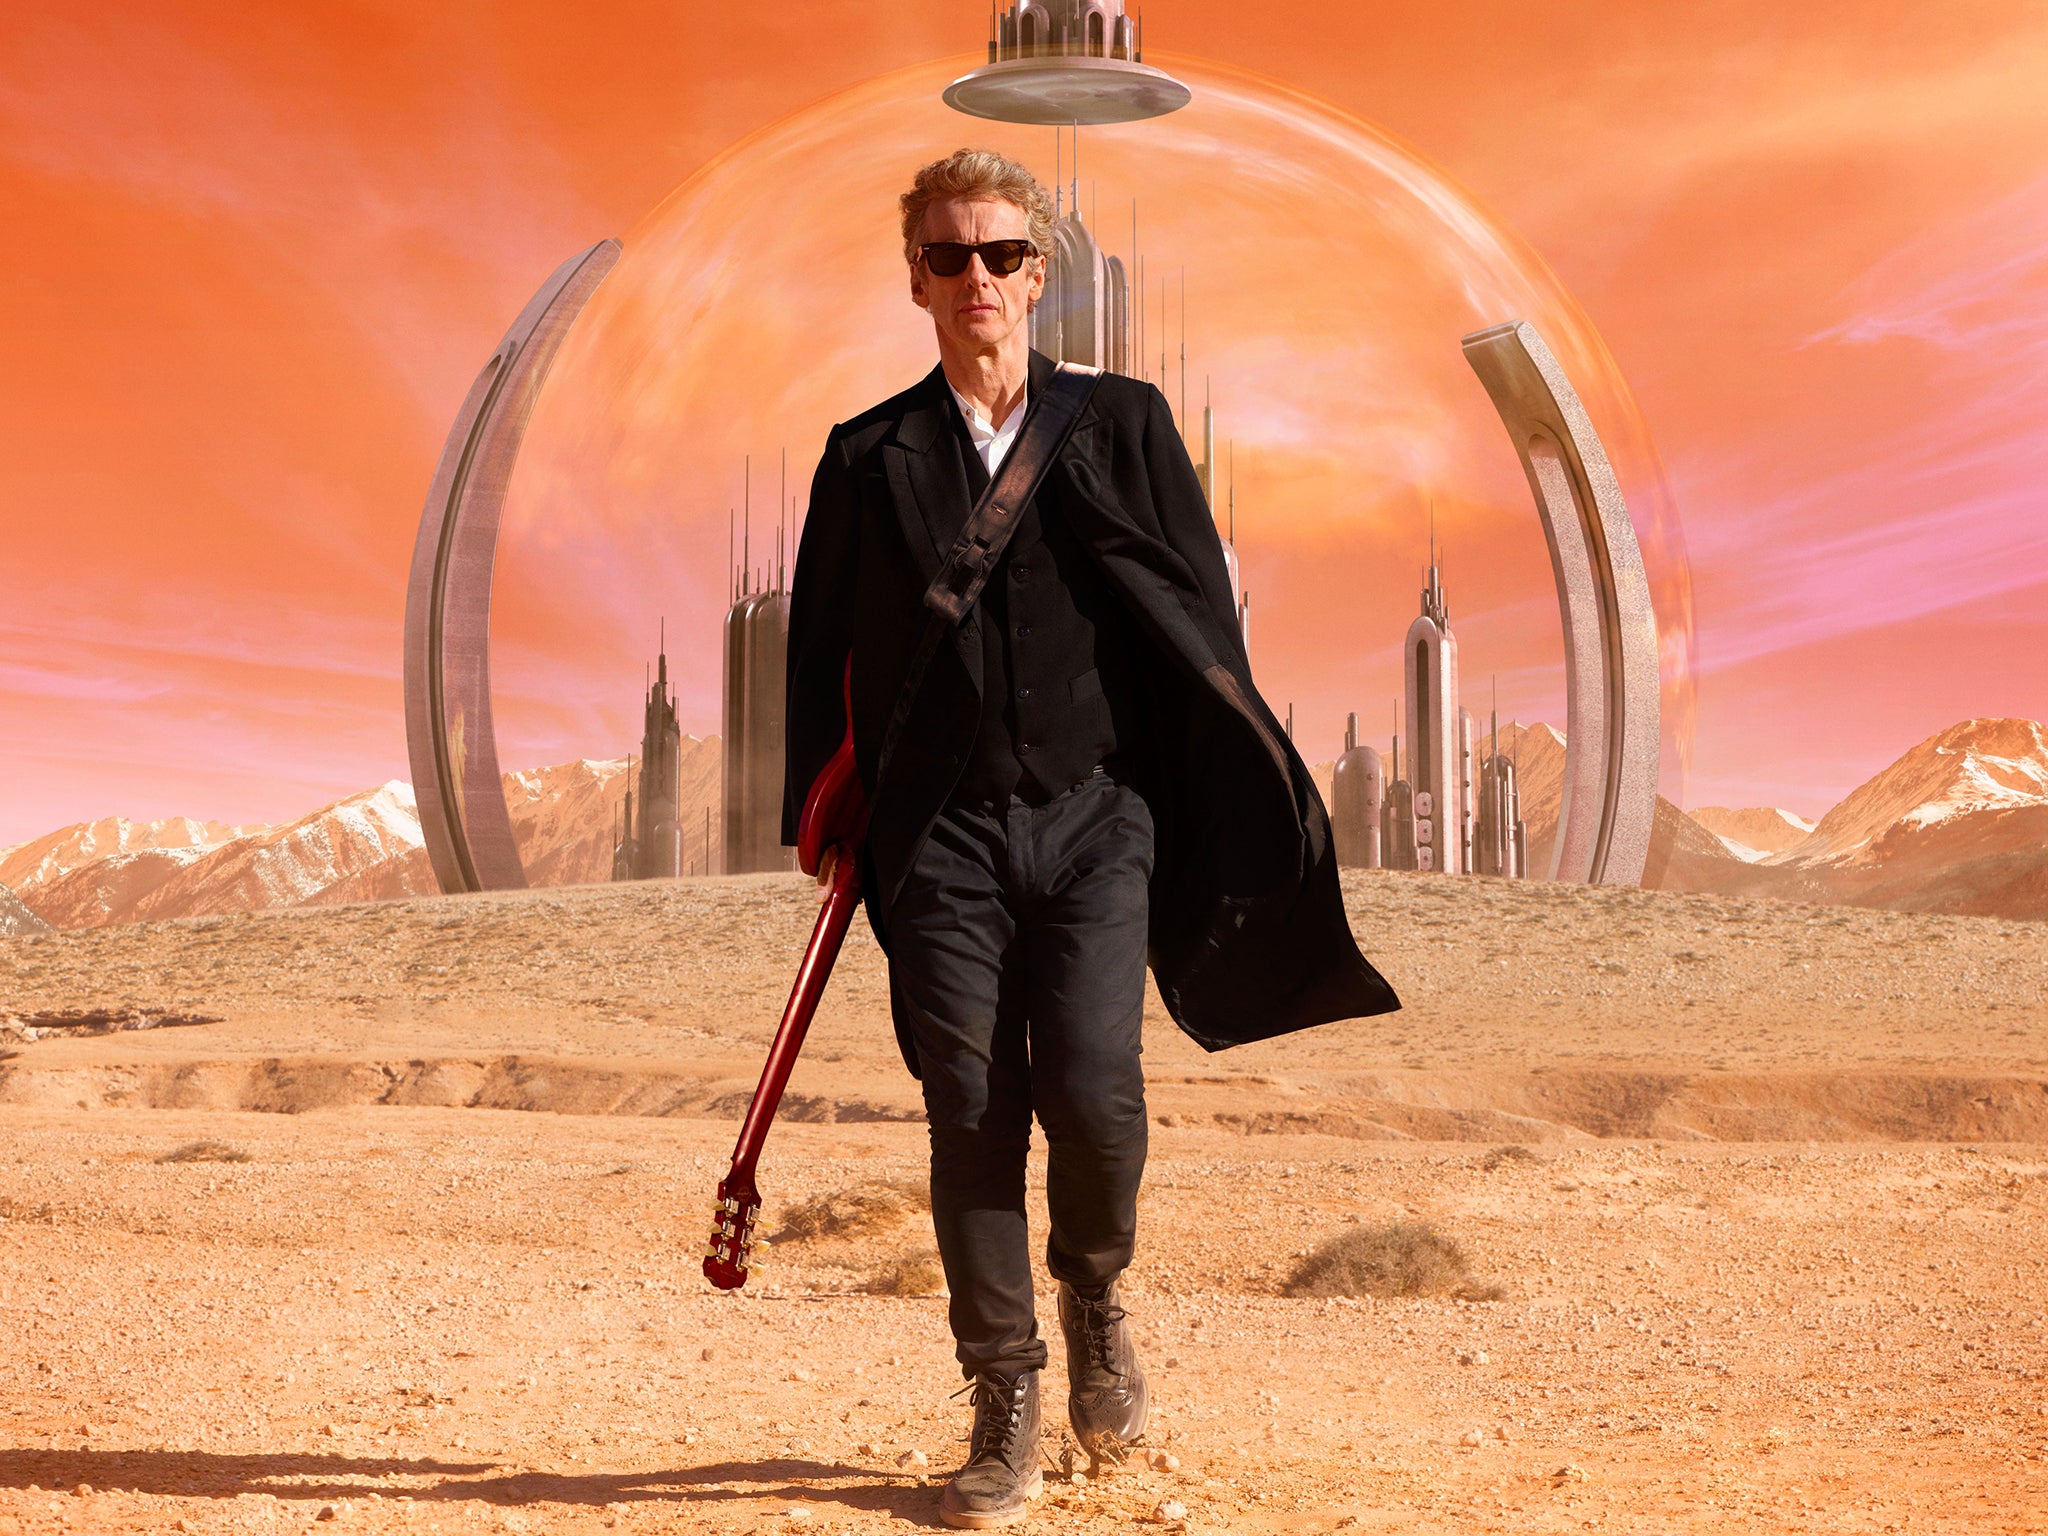 The Doctor (Peter Capaldi) finally returns to Gallifrey